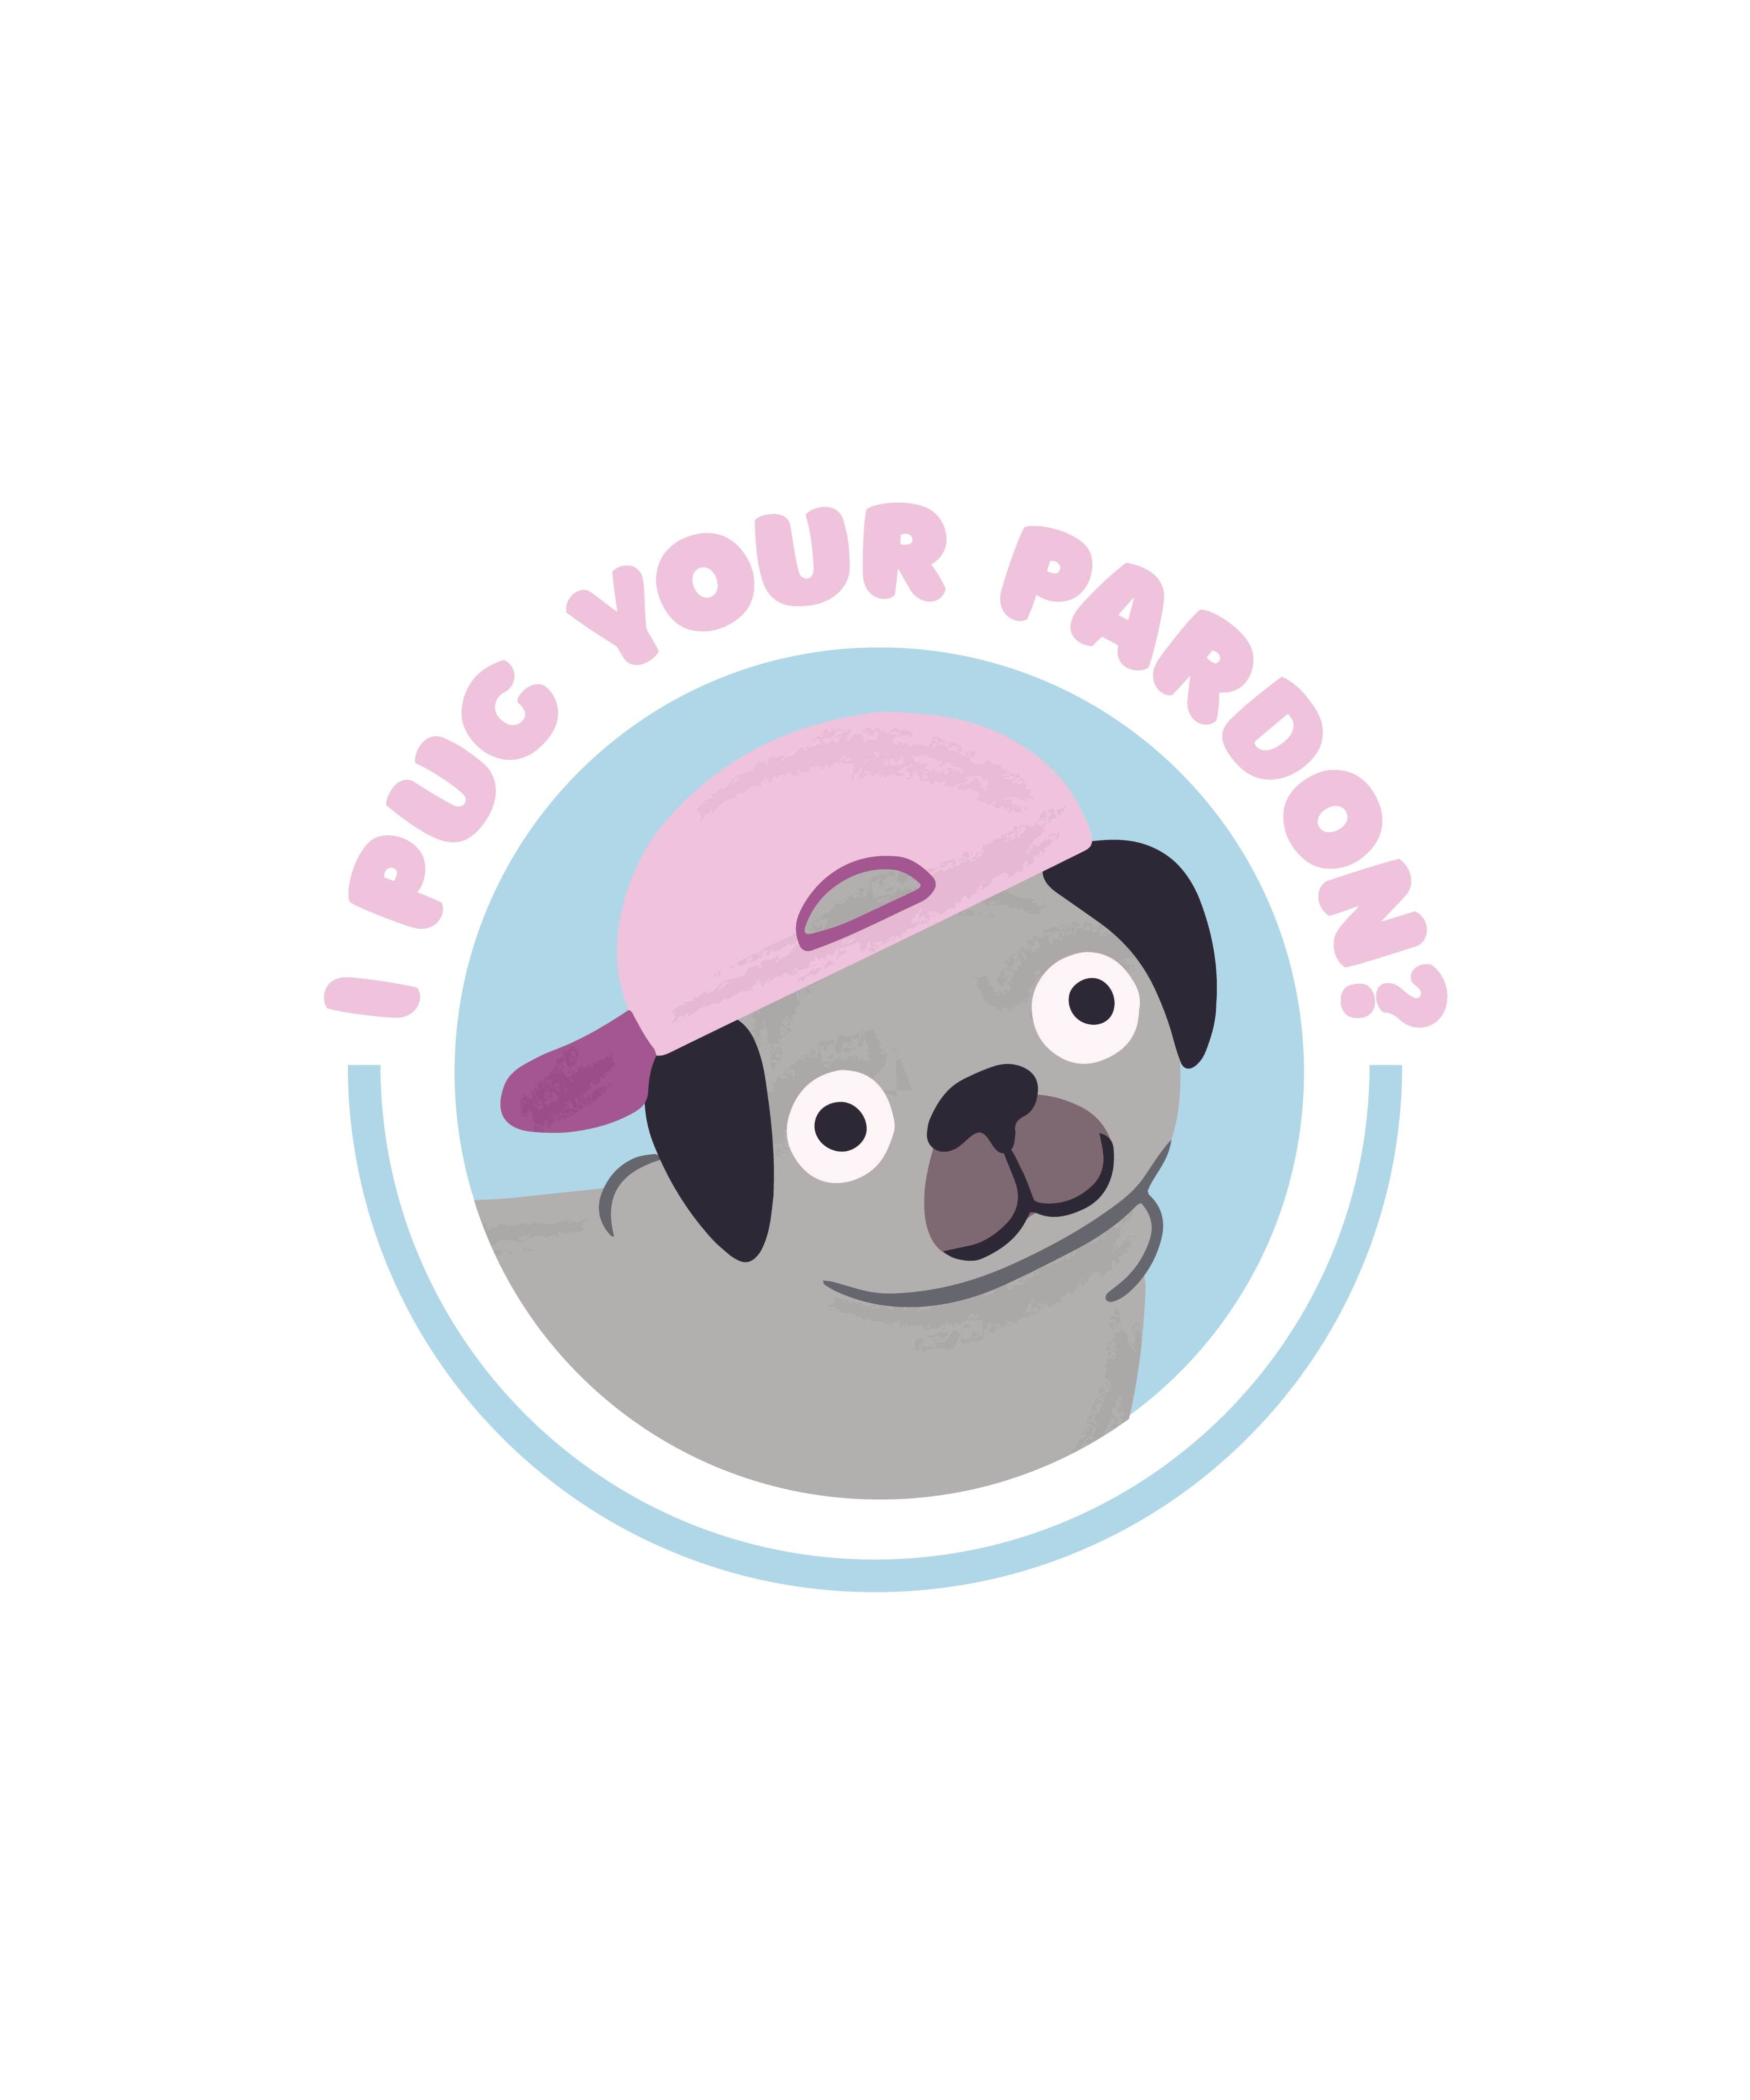 The perfect holiday gift for dog lovers - a pug wearing a pink hat with the words "I Pug Your Pardoned T-Shirt.